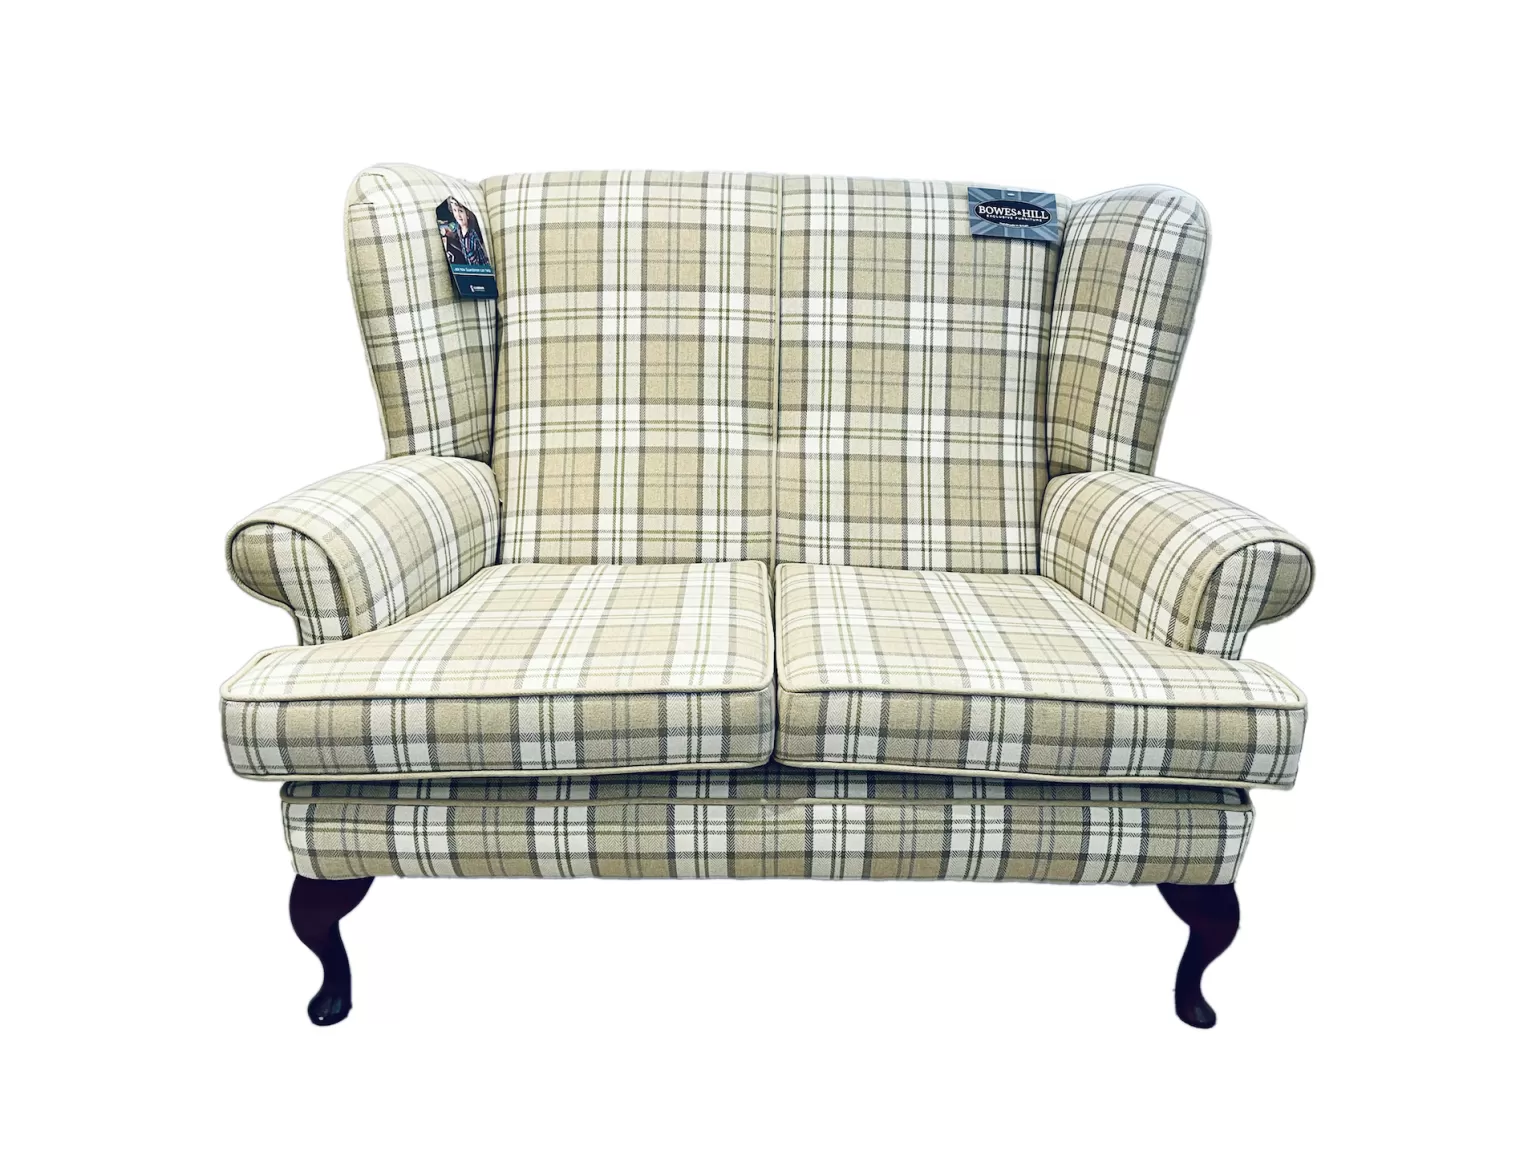 Our classic Queen Anne chair harks back to the traditional styles of the past. It’s stately back, gently curved cushions and tapered legs, combined with supreme comfort, will give timeless elegance to any room.
